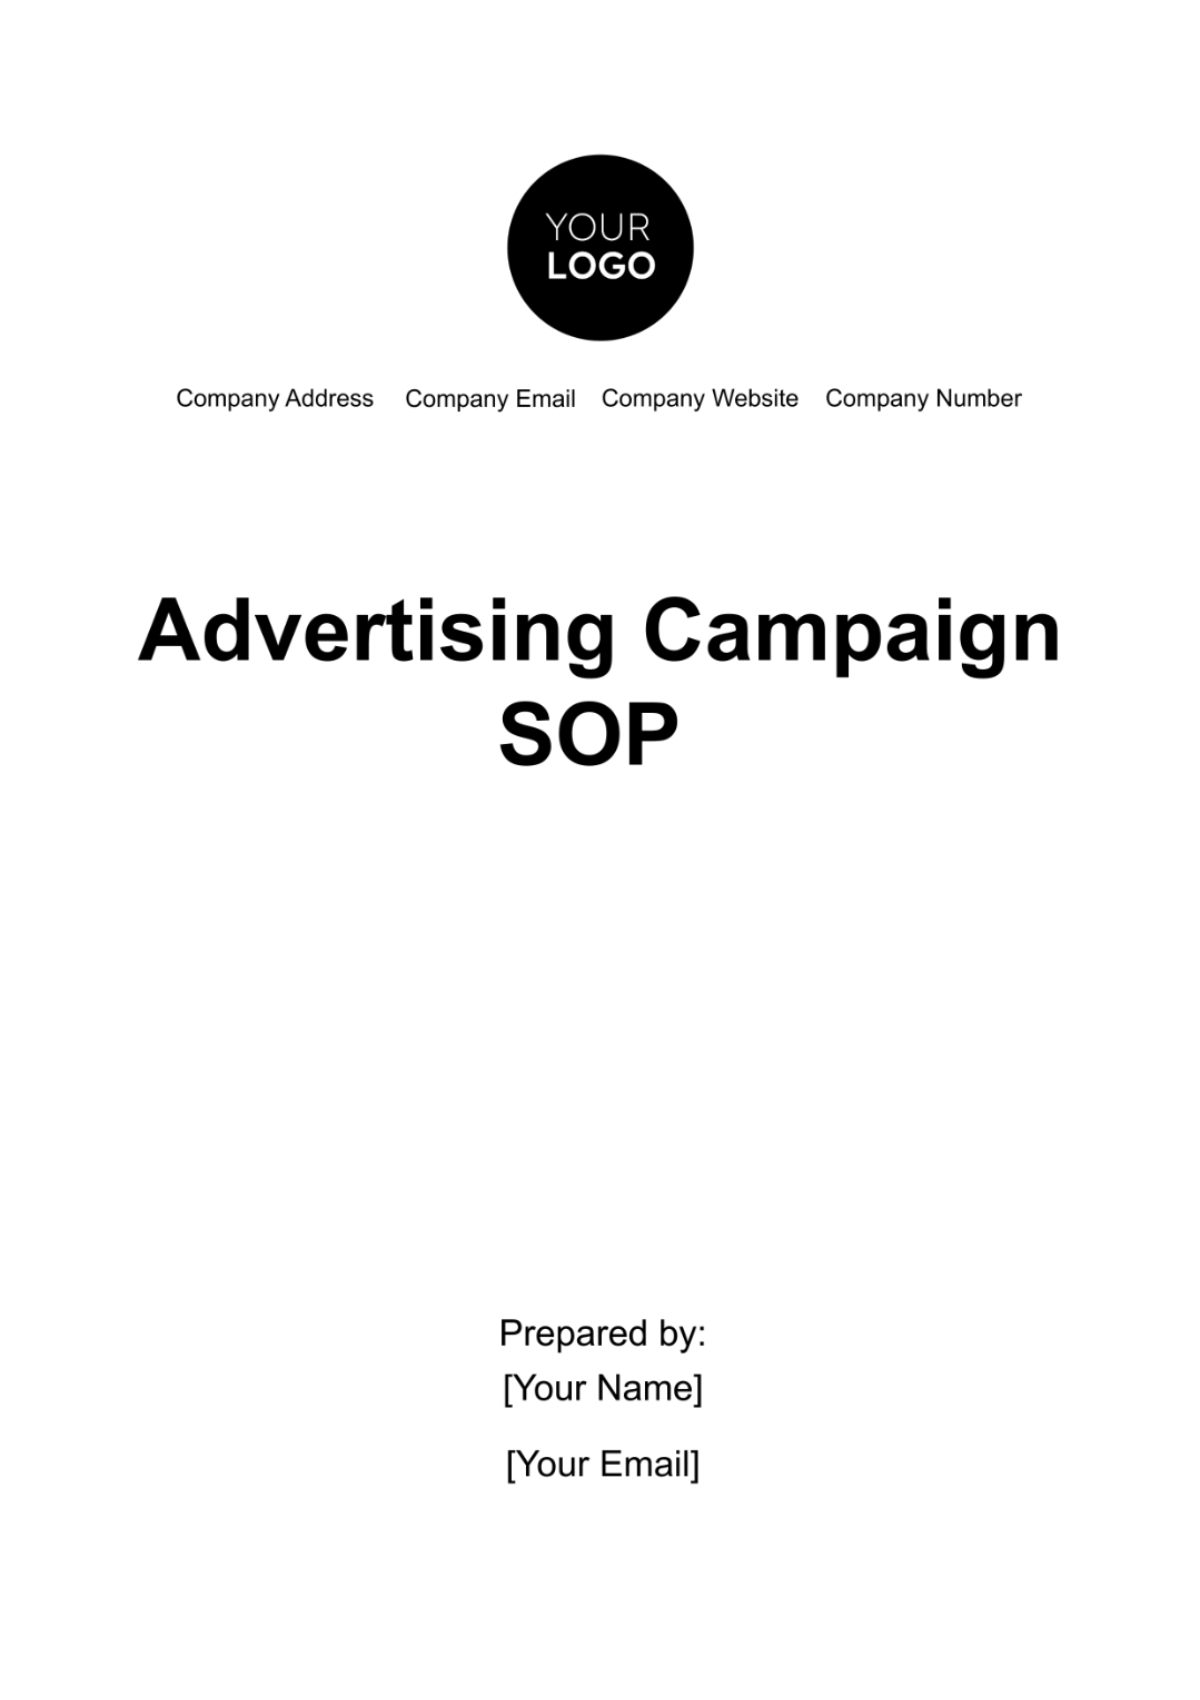 Free Advertising Campaign SOP Template